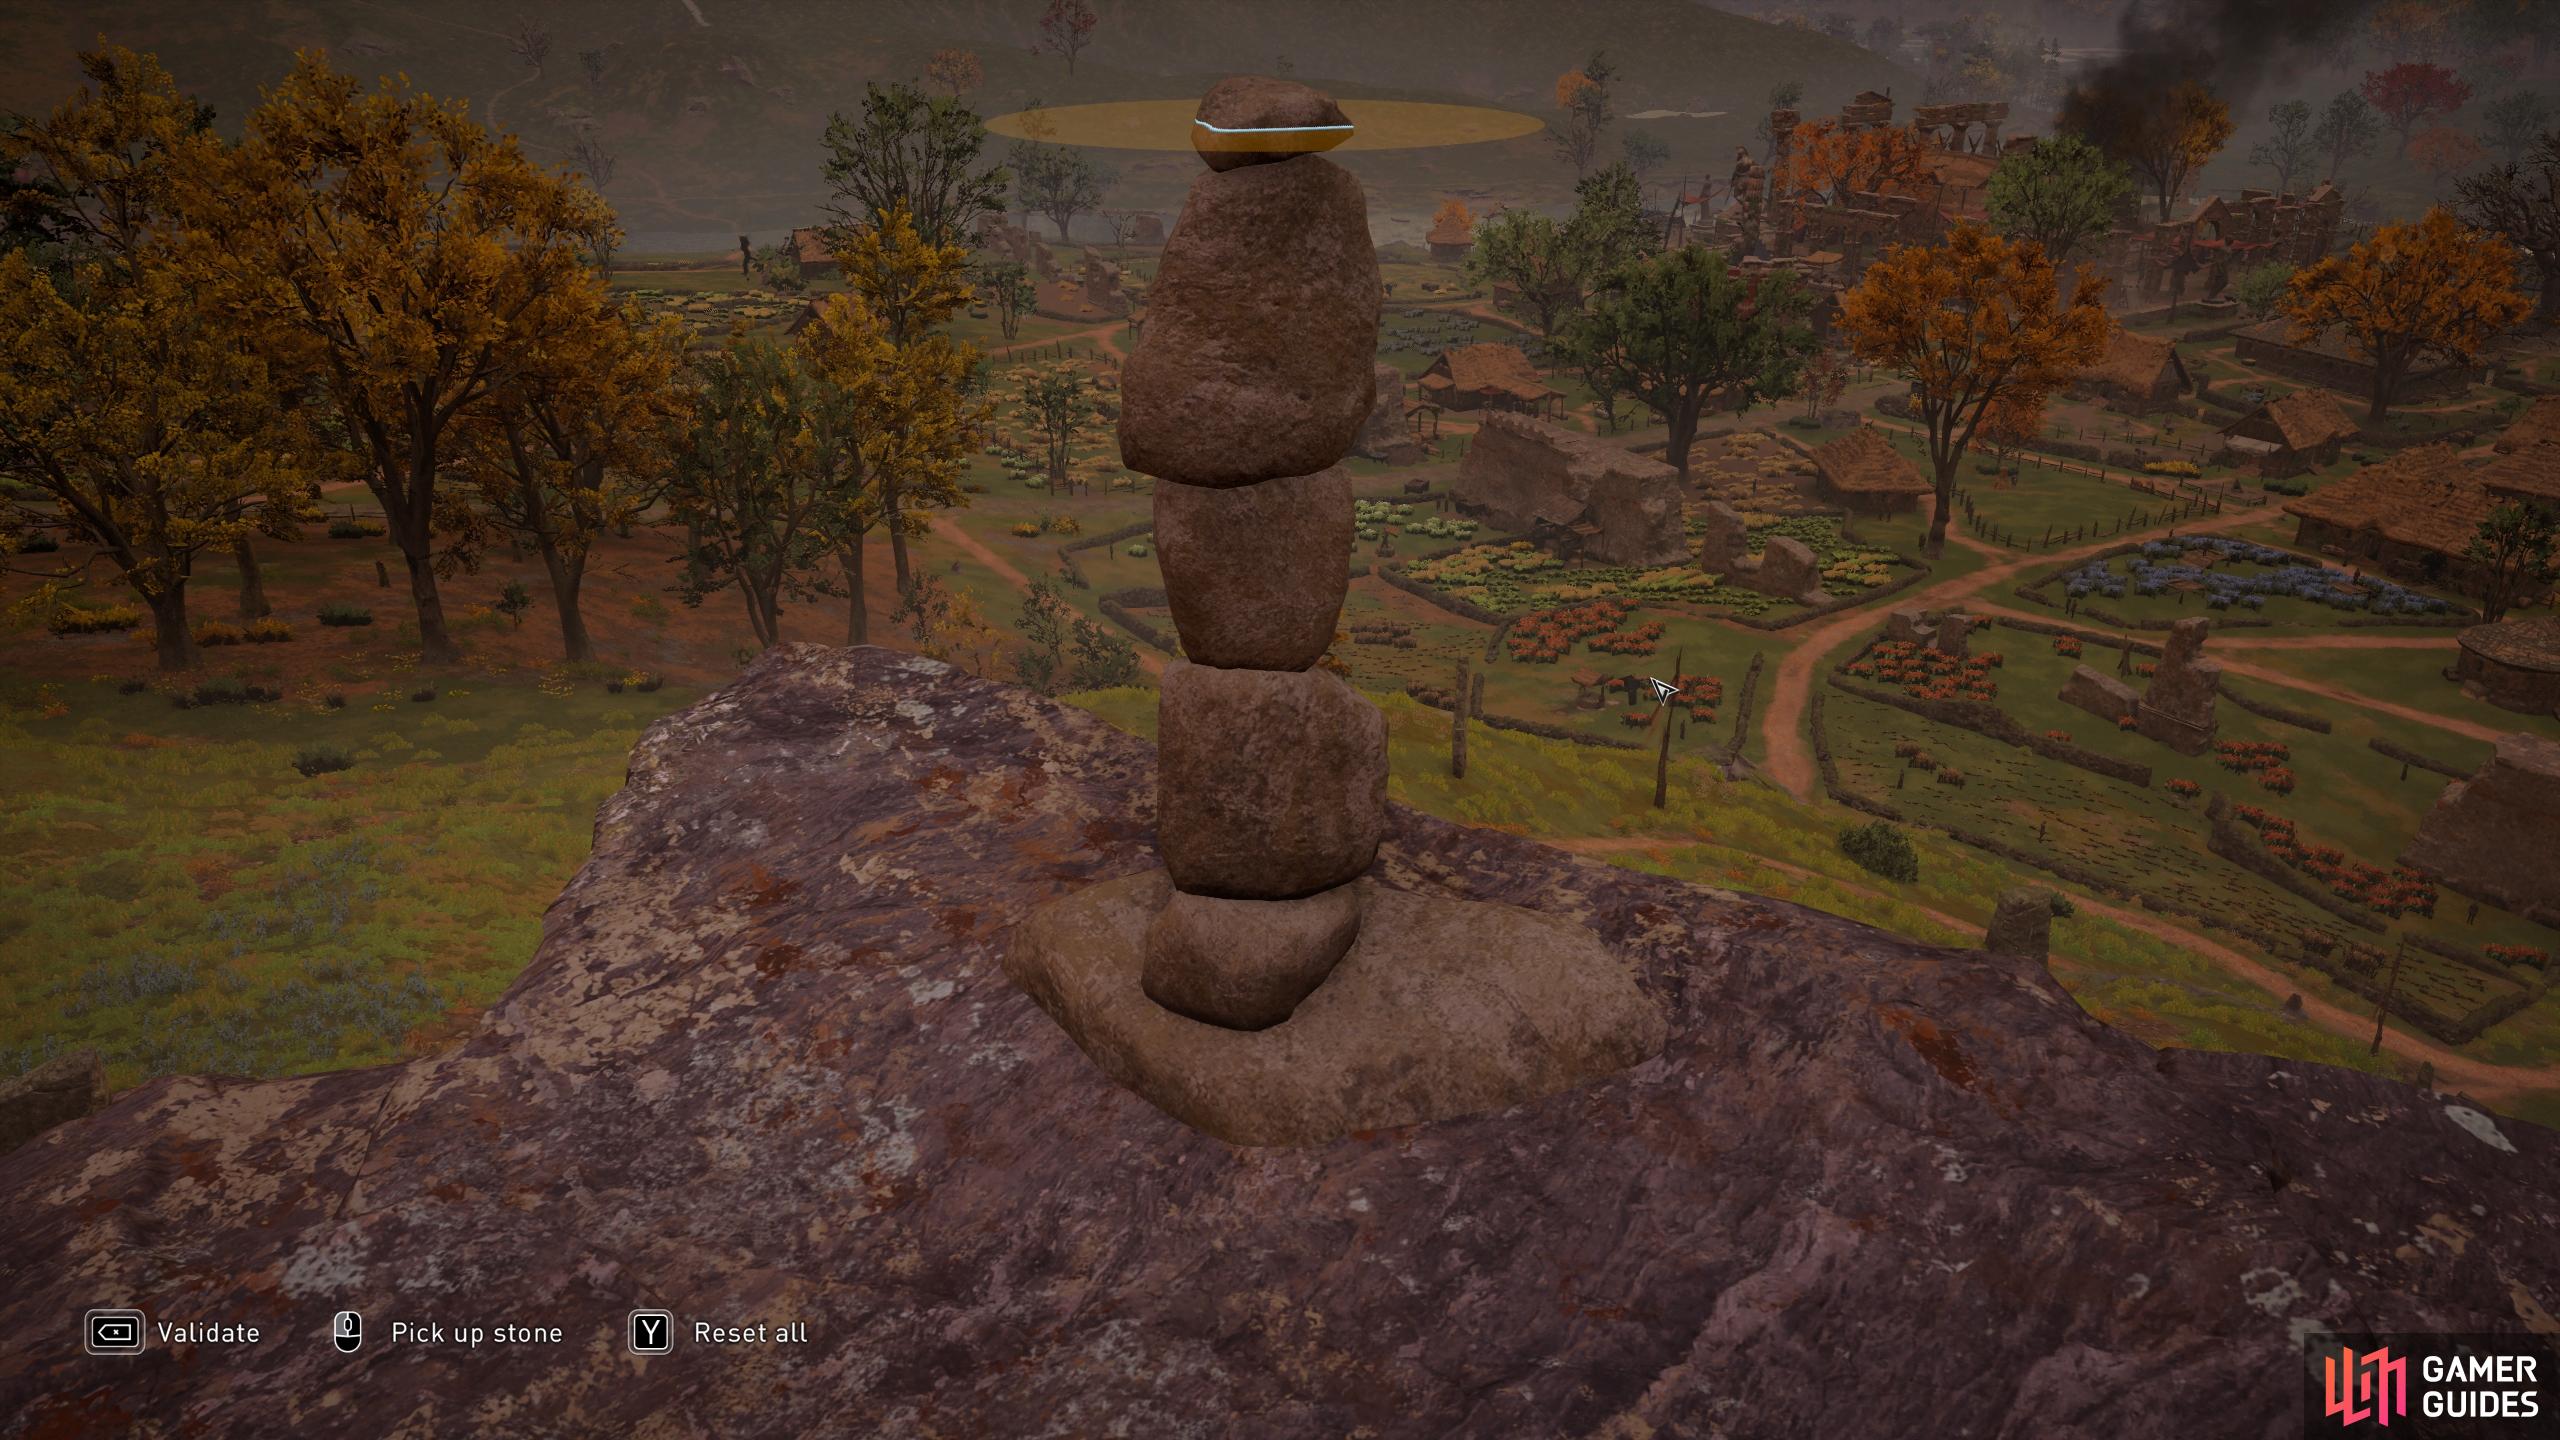 You'll need to play around with the stones to get them to balance properly, but this was the most reliable order we could find.